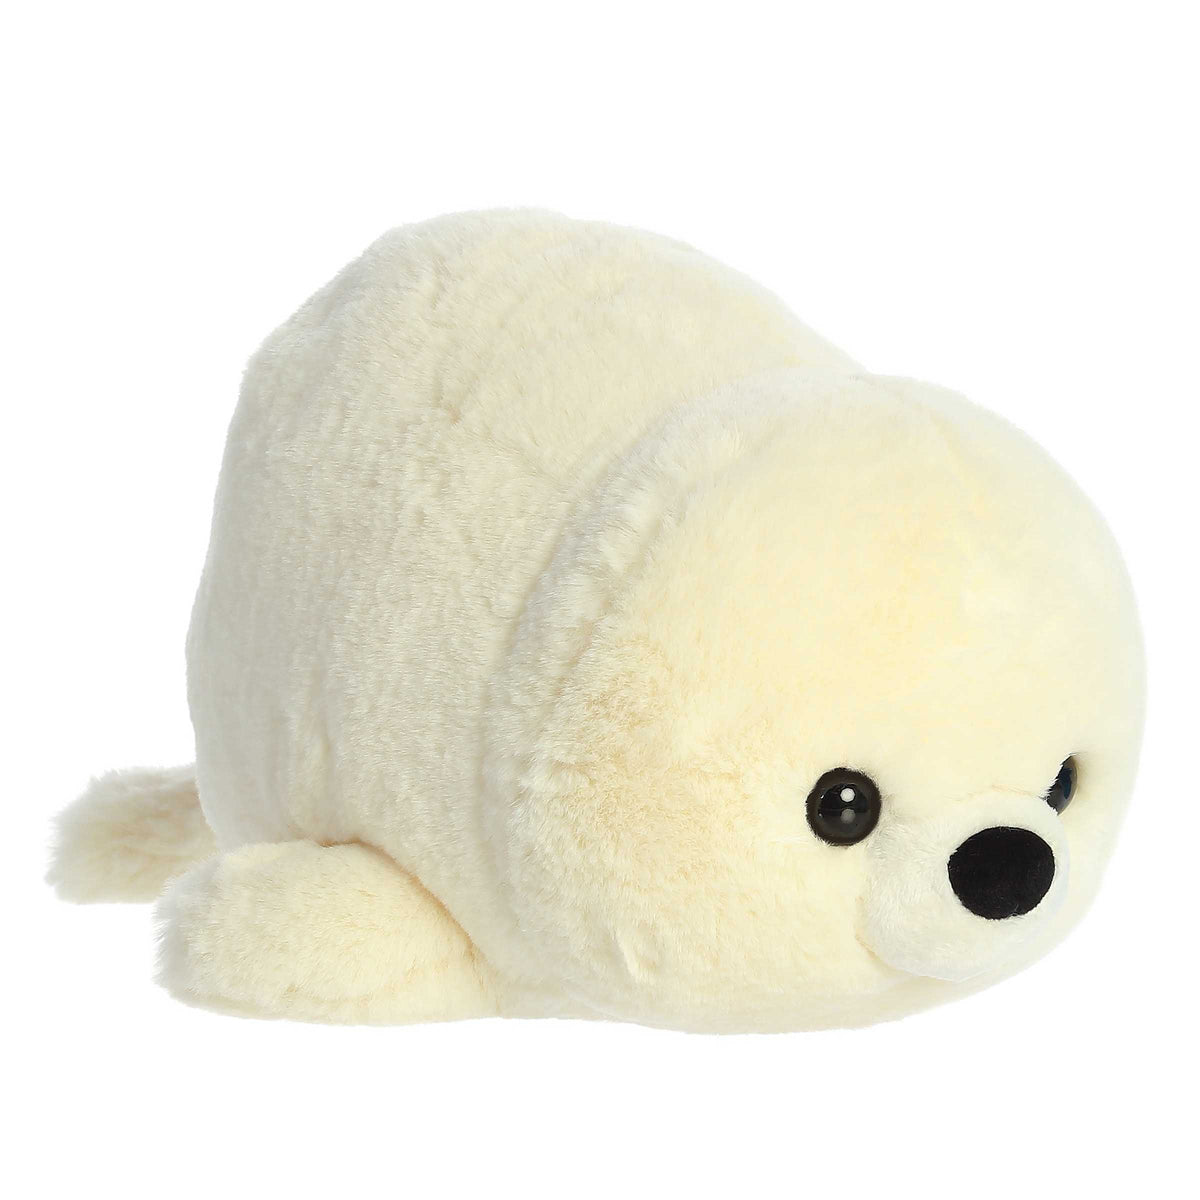 Stella Seal from Spudsters, a potato-shaped plush with creamy white fur and sparkling eyes